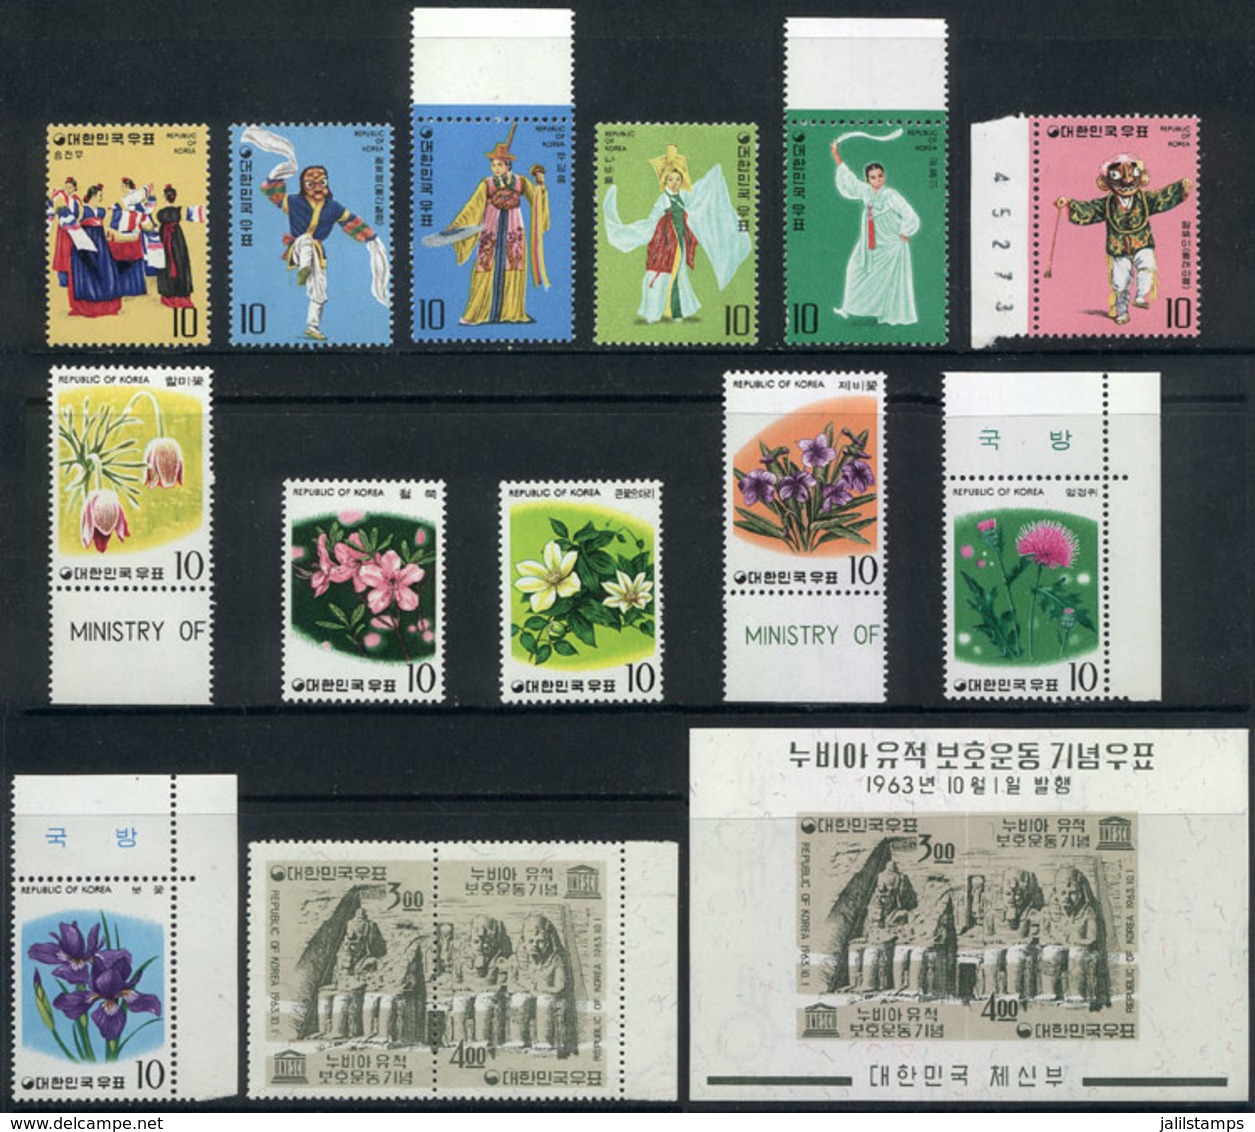 KOREA: Lot Of Very Thematic Stamps And Sets Of Excellent Quality, Yvert Catalog Value Over Euros 50, Low Start! - Korea (...-1945)